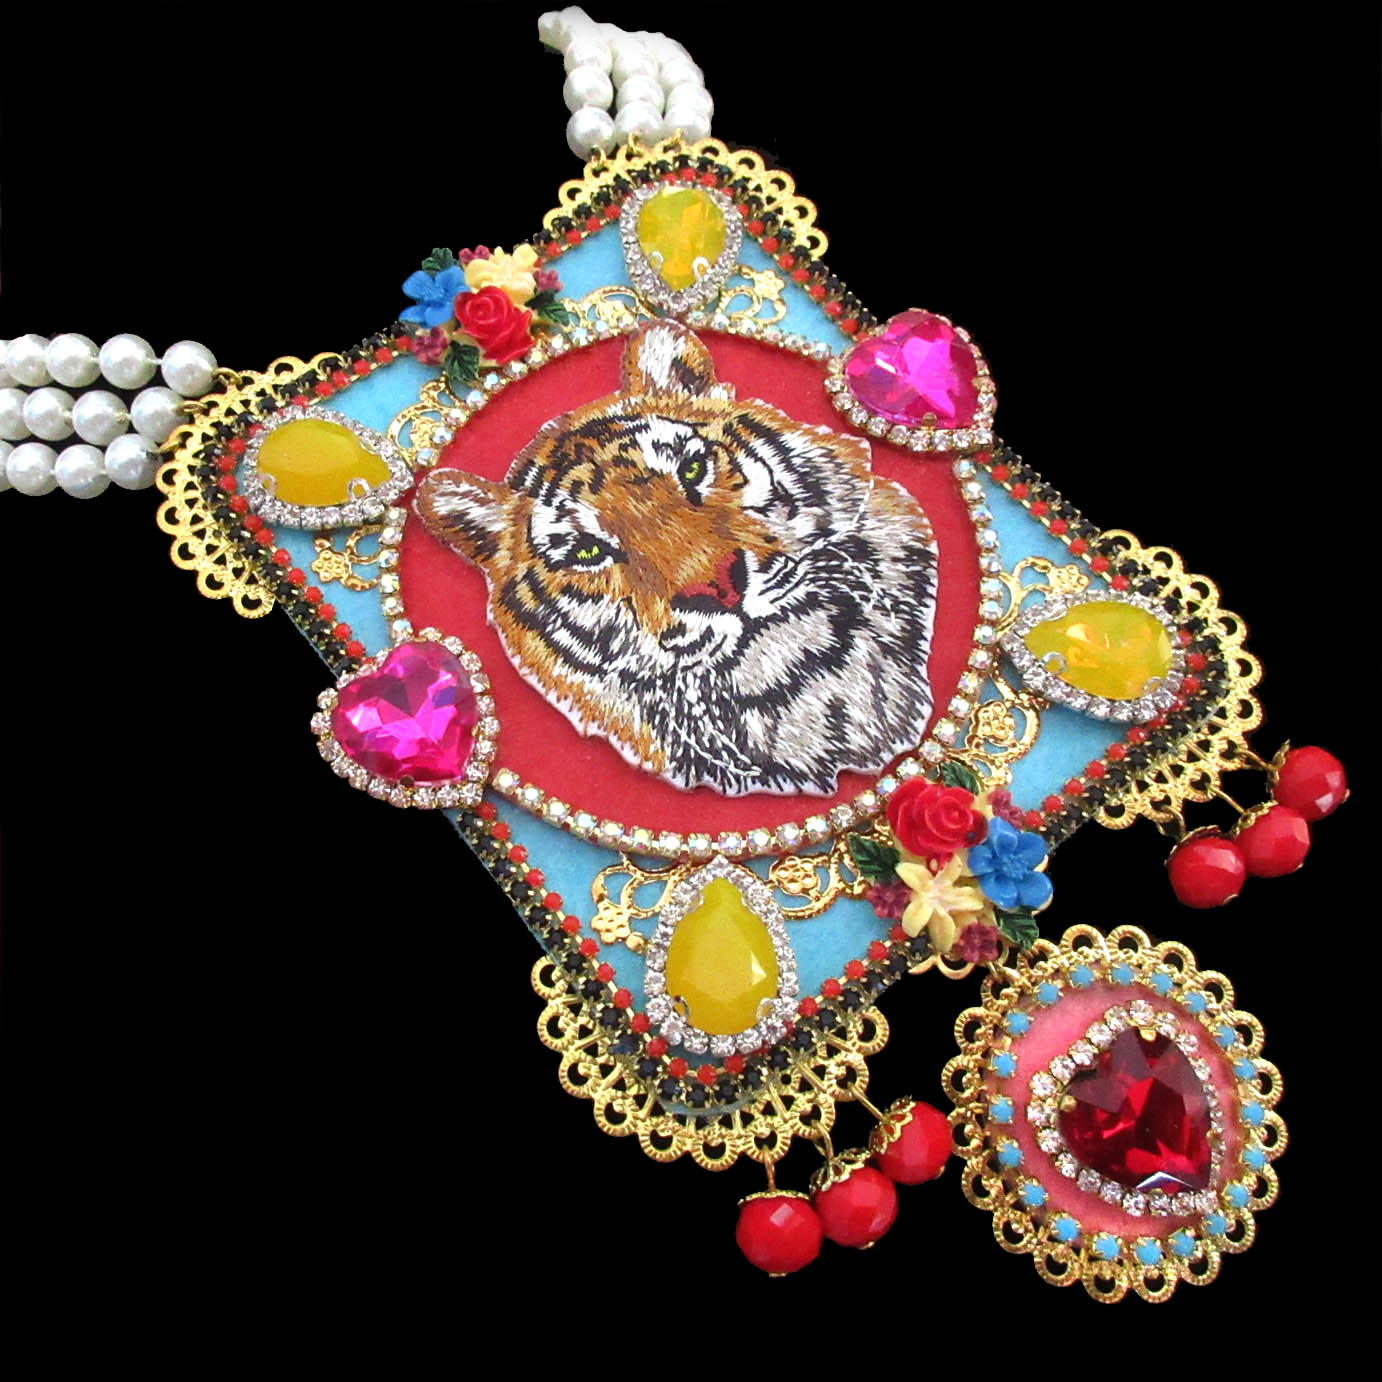 mouchkine jewelry luxury tiger necklace, ornate with an embroided tiger, pink glass hearts, yellow chipped citrine stones, and delicate red glass pearls.